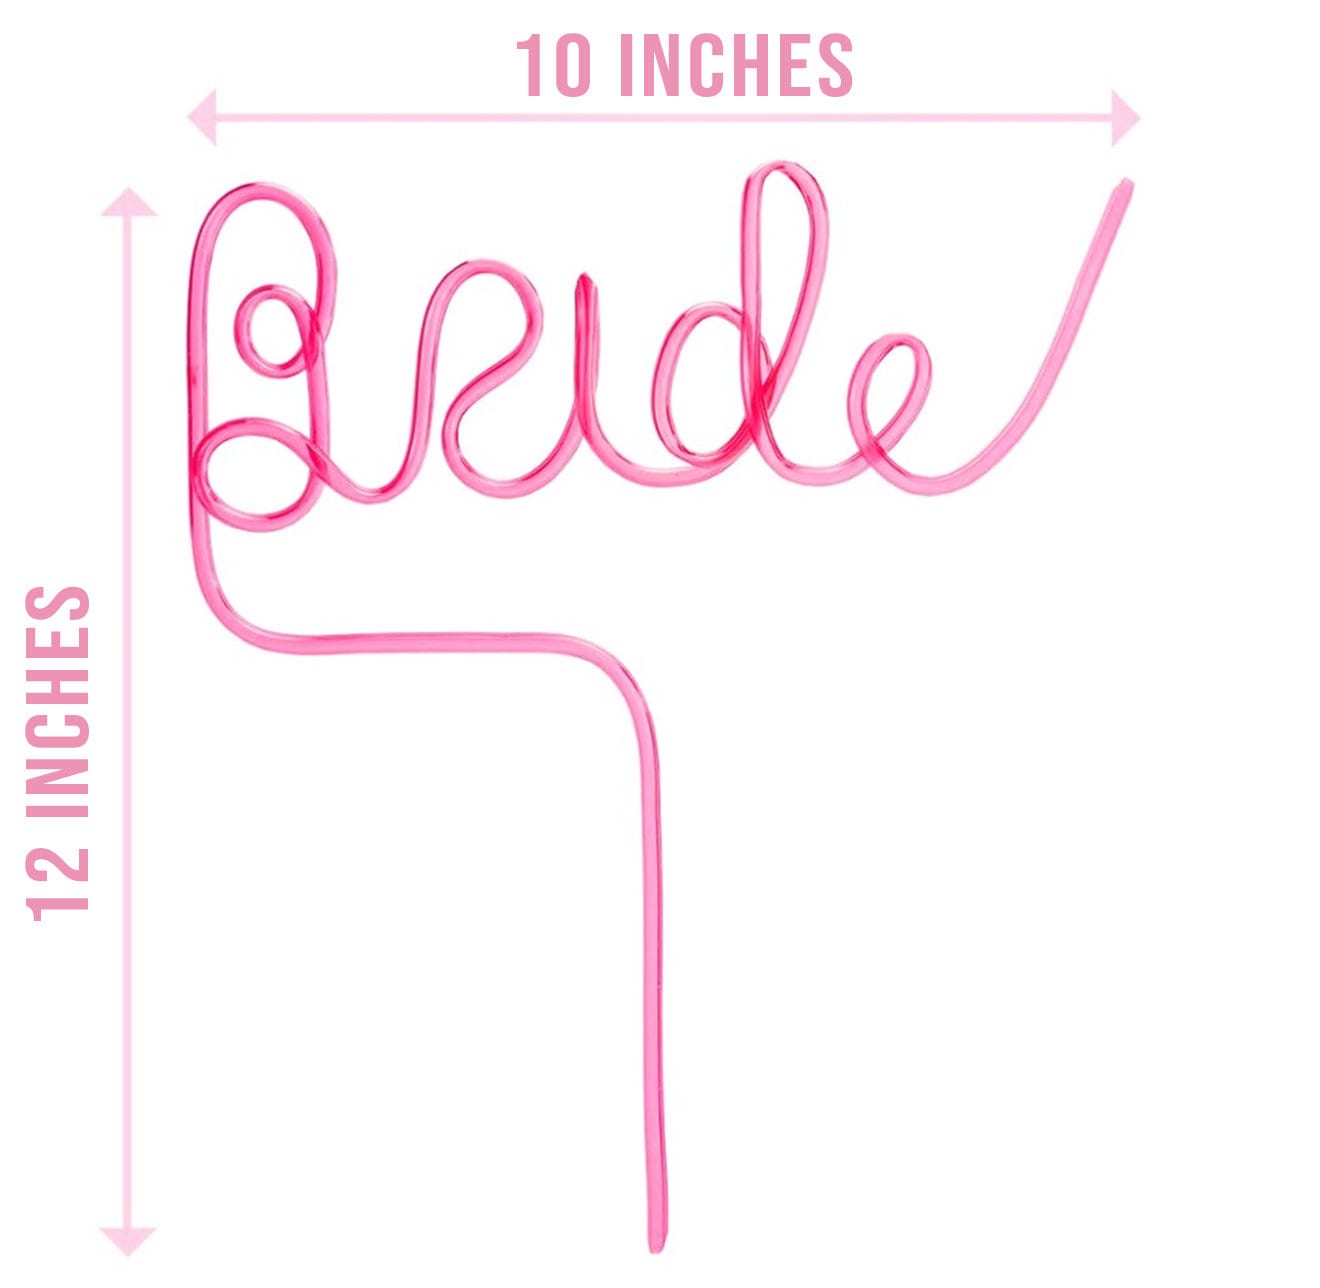 Penis Straws with Bride Straw - Bachelorette Party Favors - Bachelorette Party Decoration Kit - Wedding Shower Gift